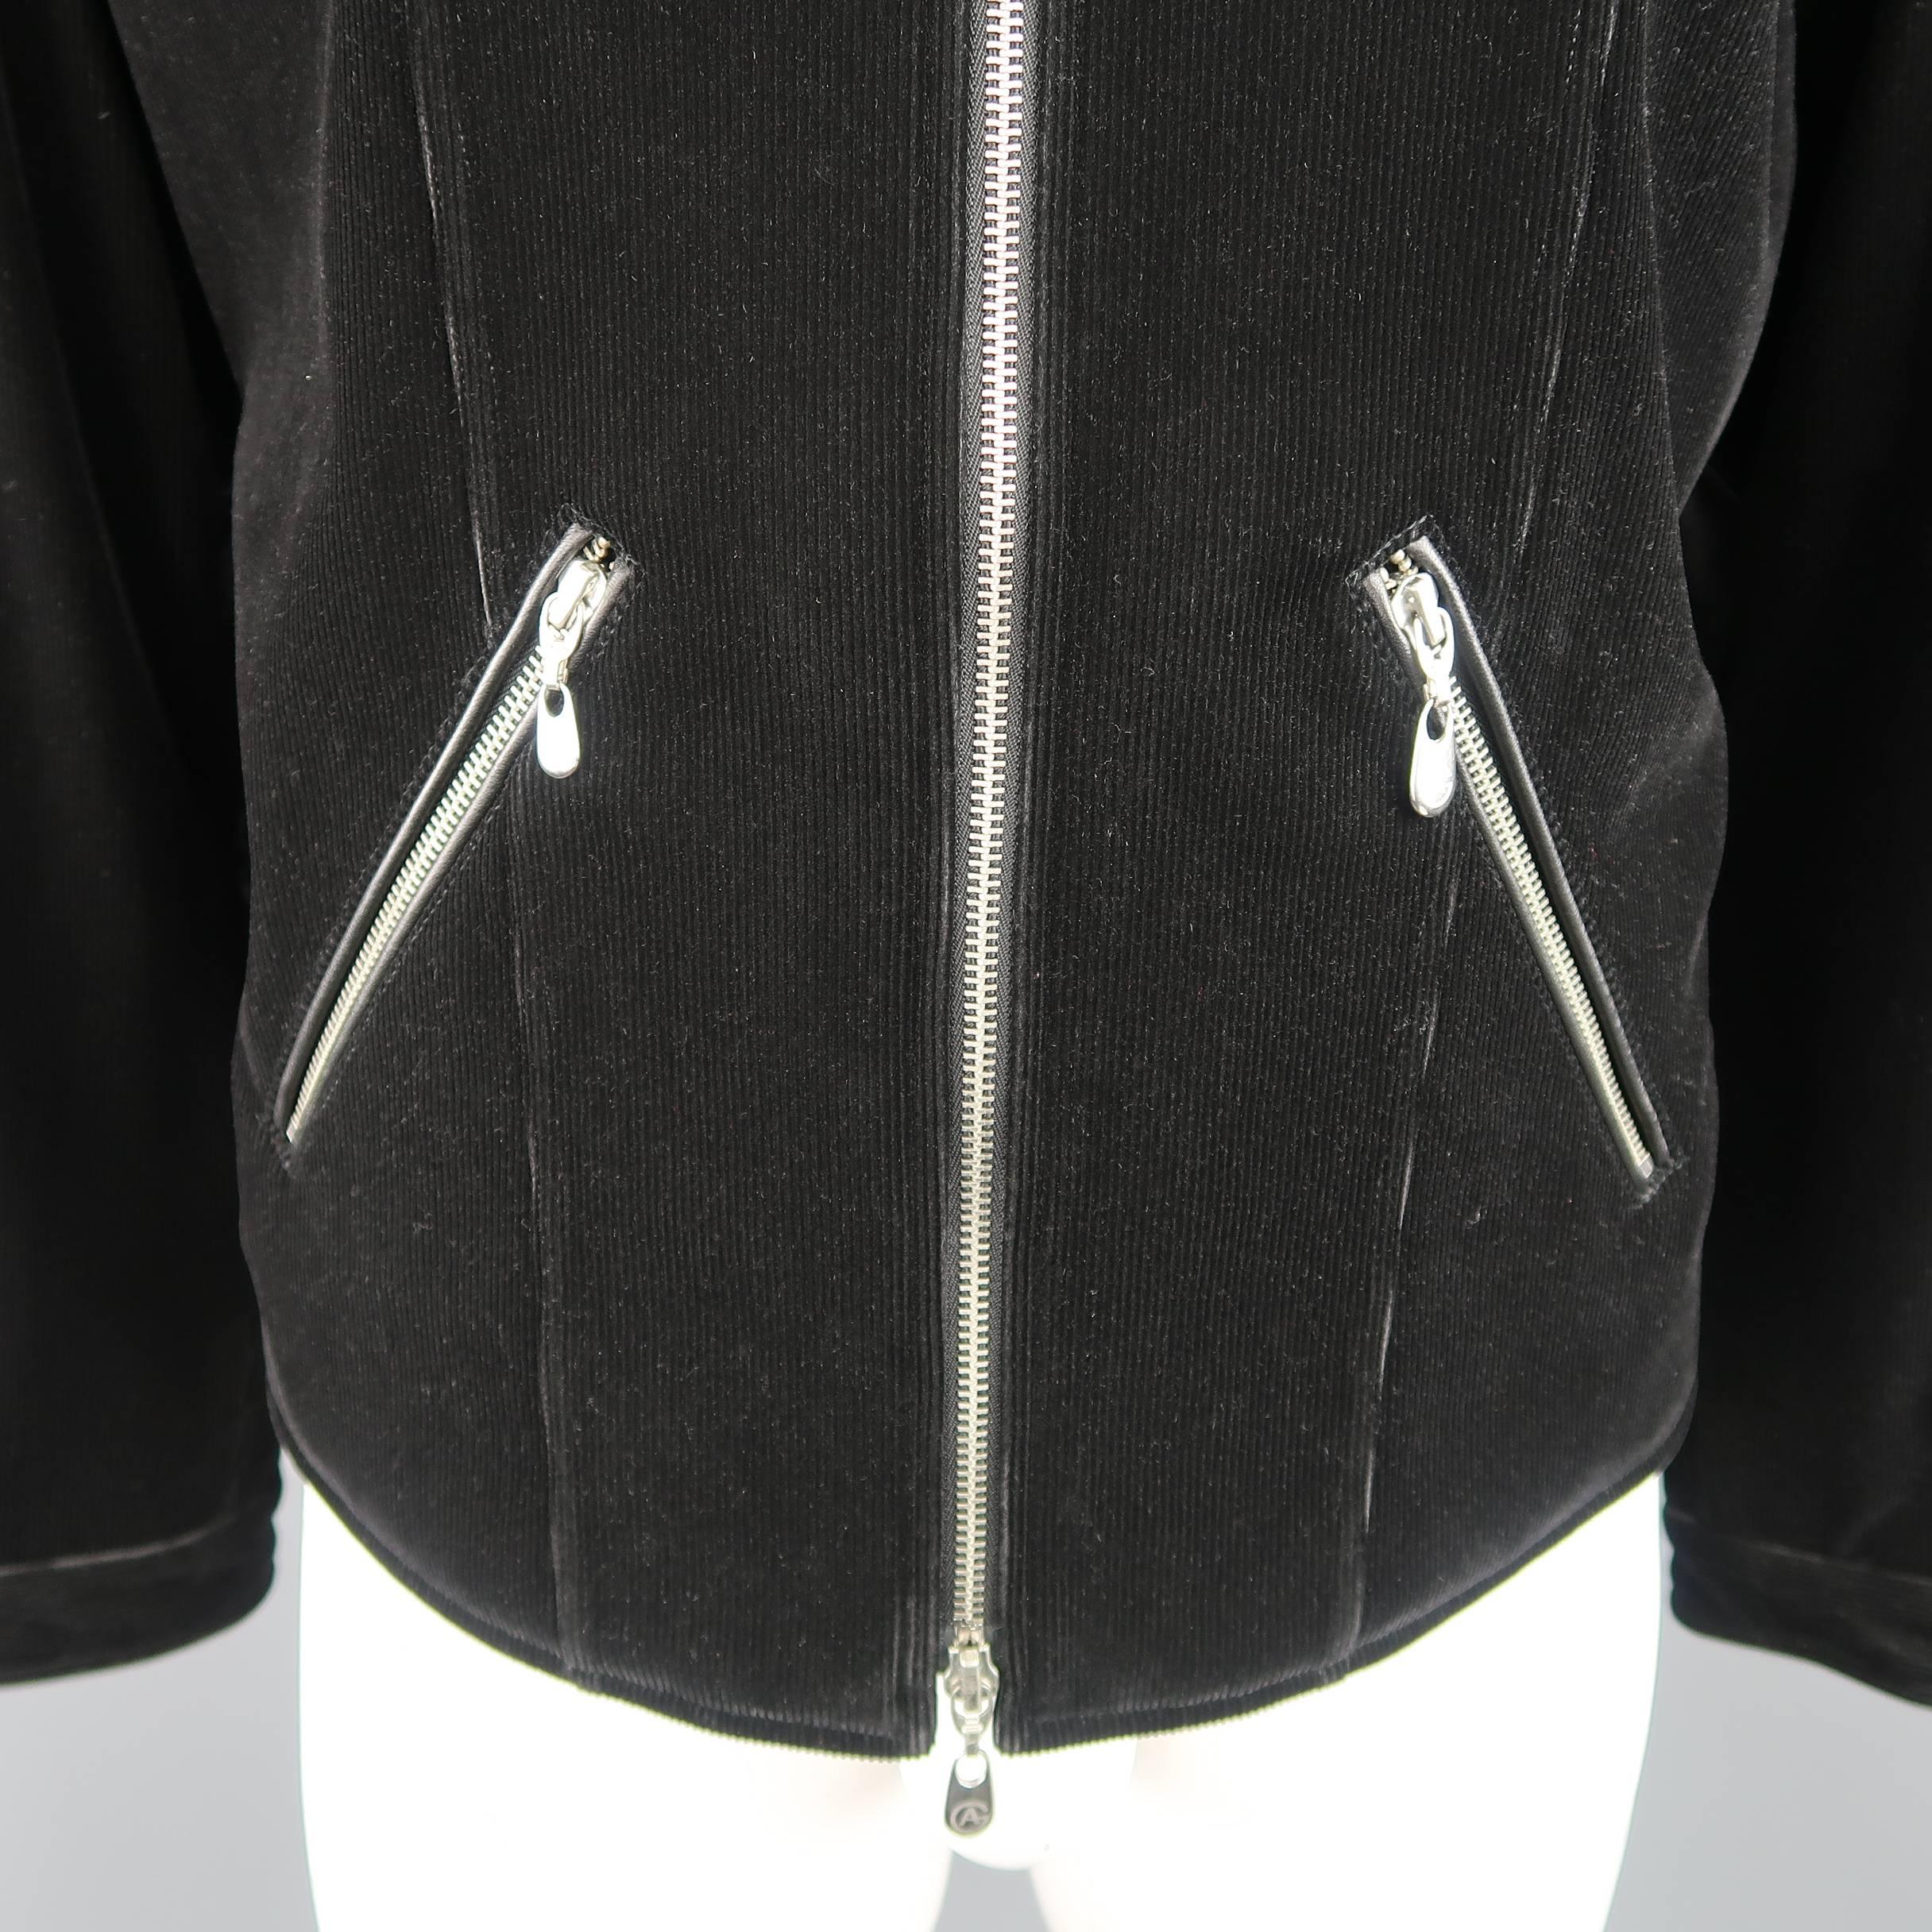 ARMANI COLLEZIONI biker motorcycle style jacket comes in black corduroy and features a band collar with snap, double zip front, diagonal zip pockets, black piping and elbow patches, and stretch back panel with tabs. Minor wear and missing zip tab.